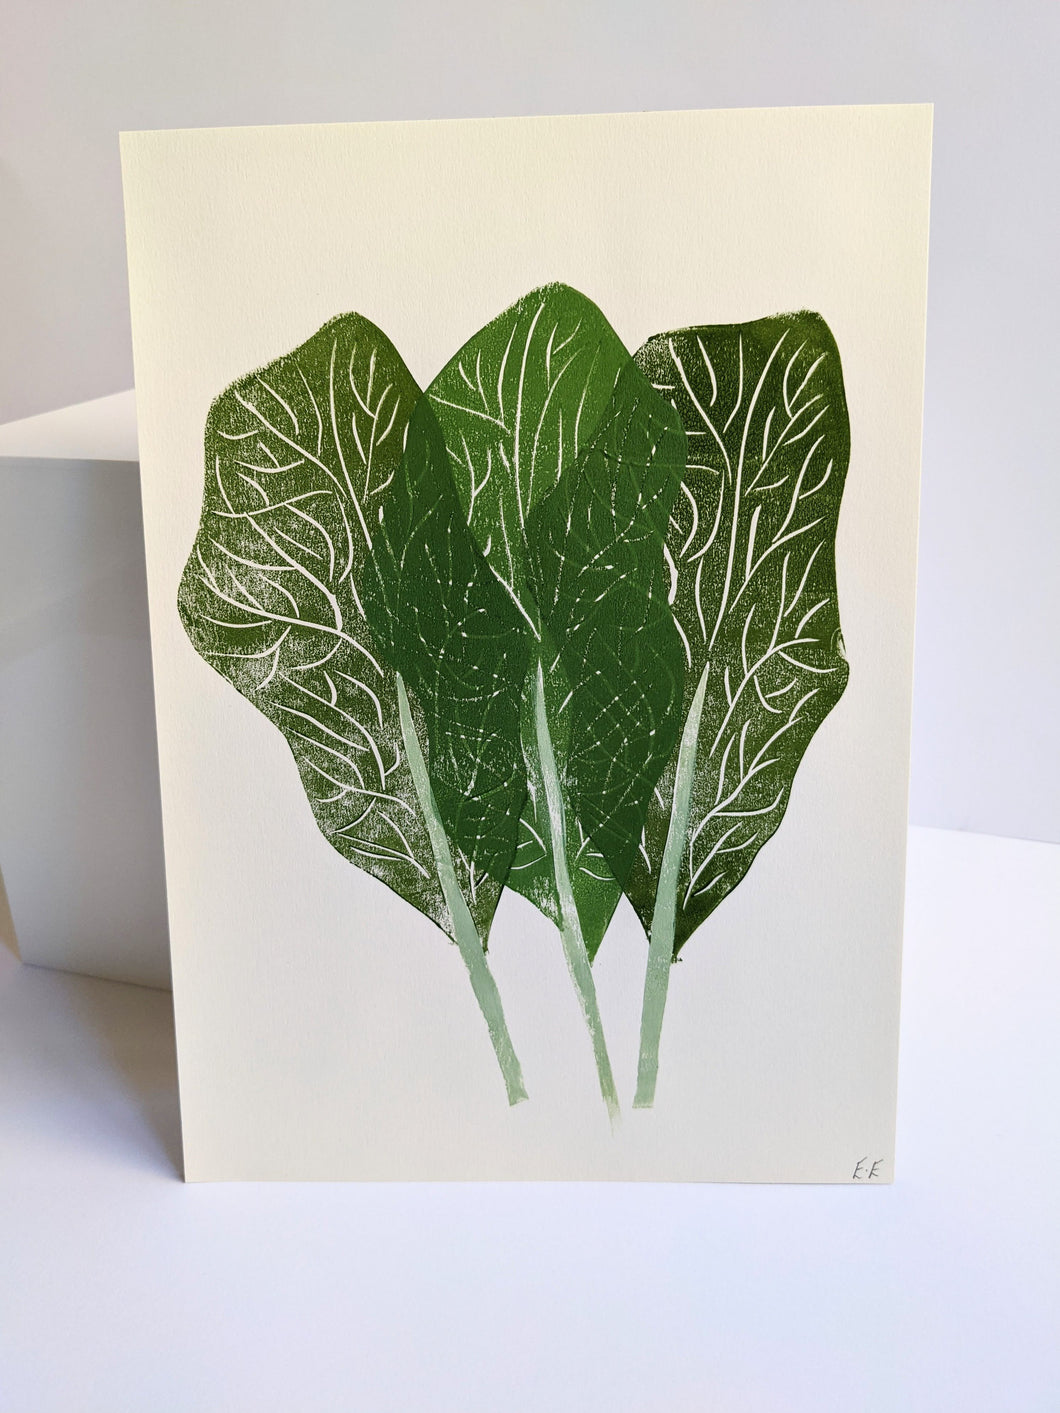 A print of three green leaves against a white background